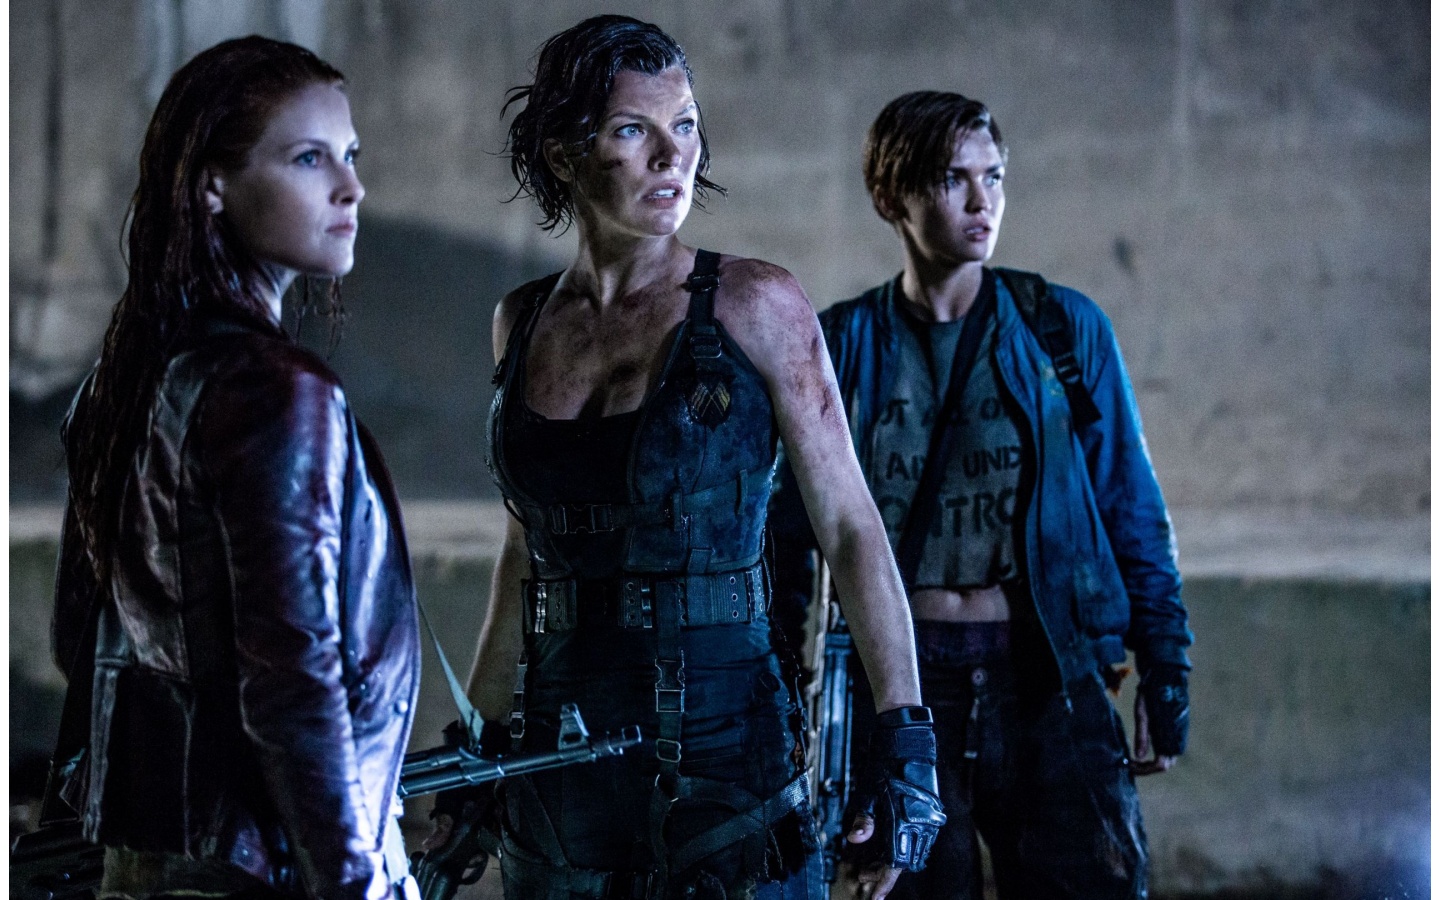 Resident Evil The Final Chapter